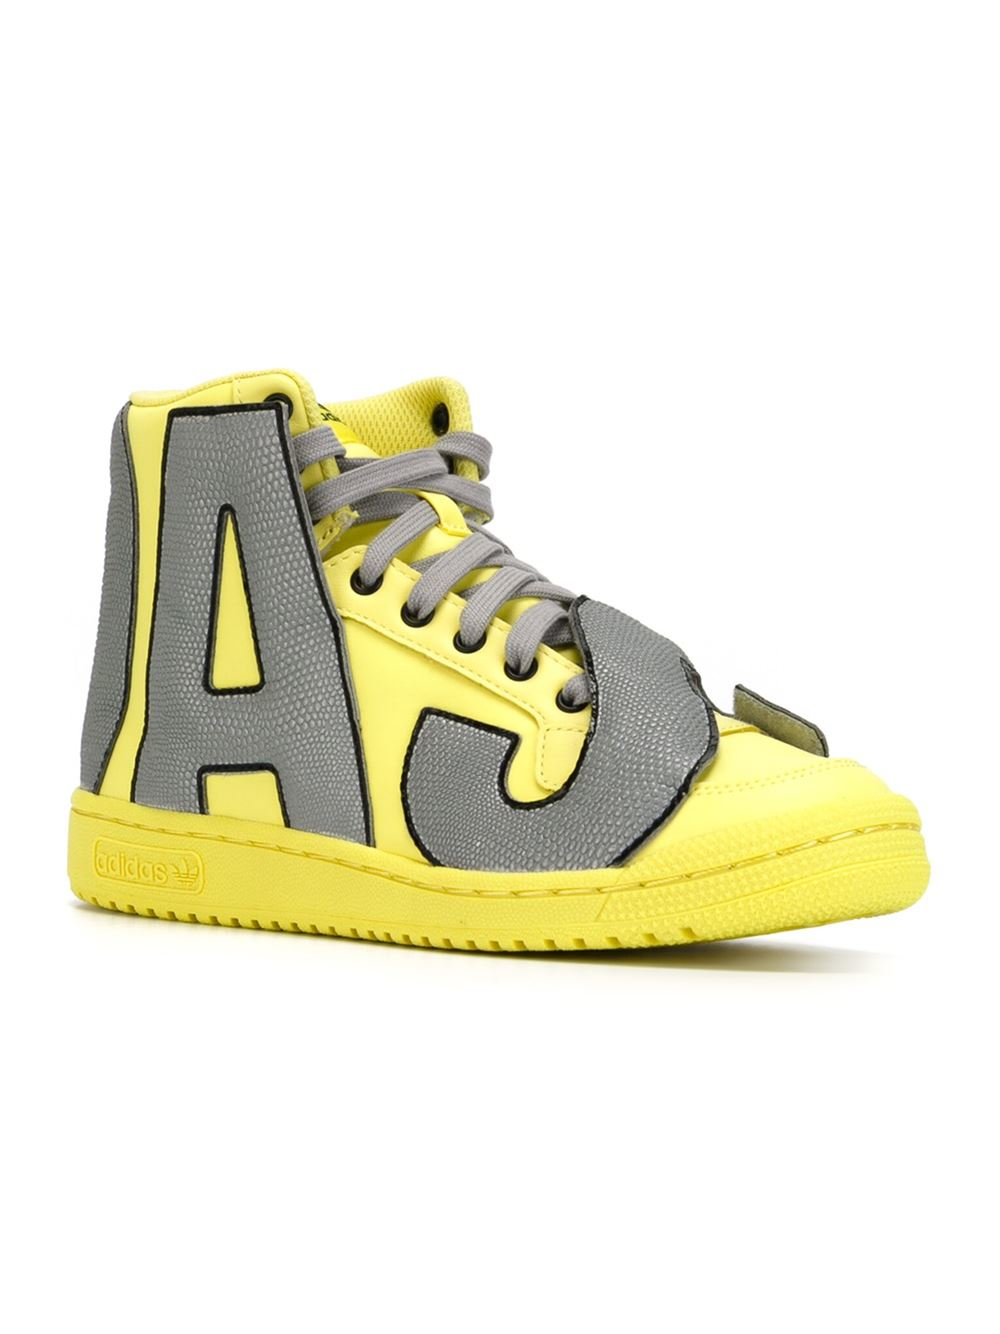 adidas Originals Jeremy Scott X 'letters Reflective' Hi-top Sneakers in  Yellow | Lyst